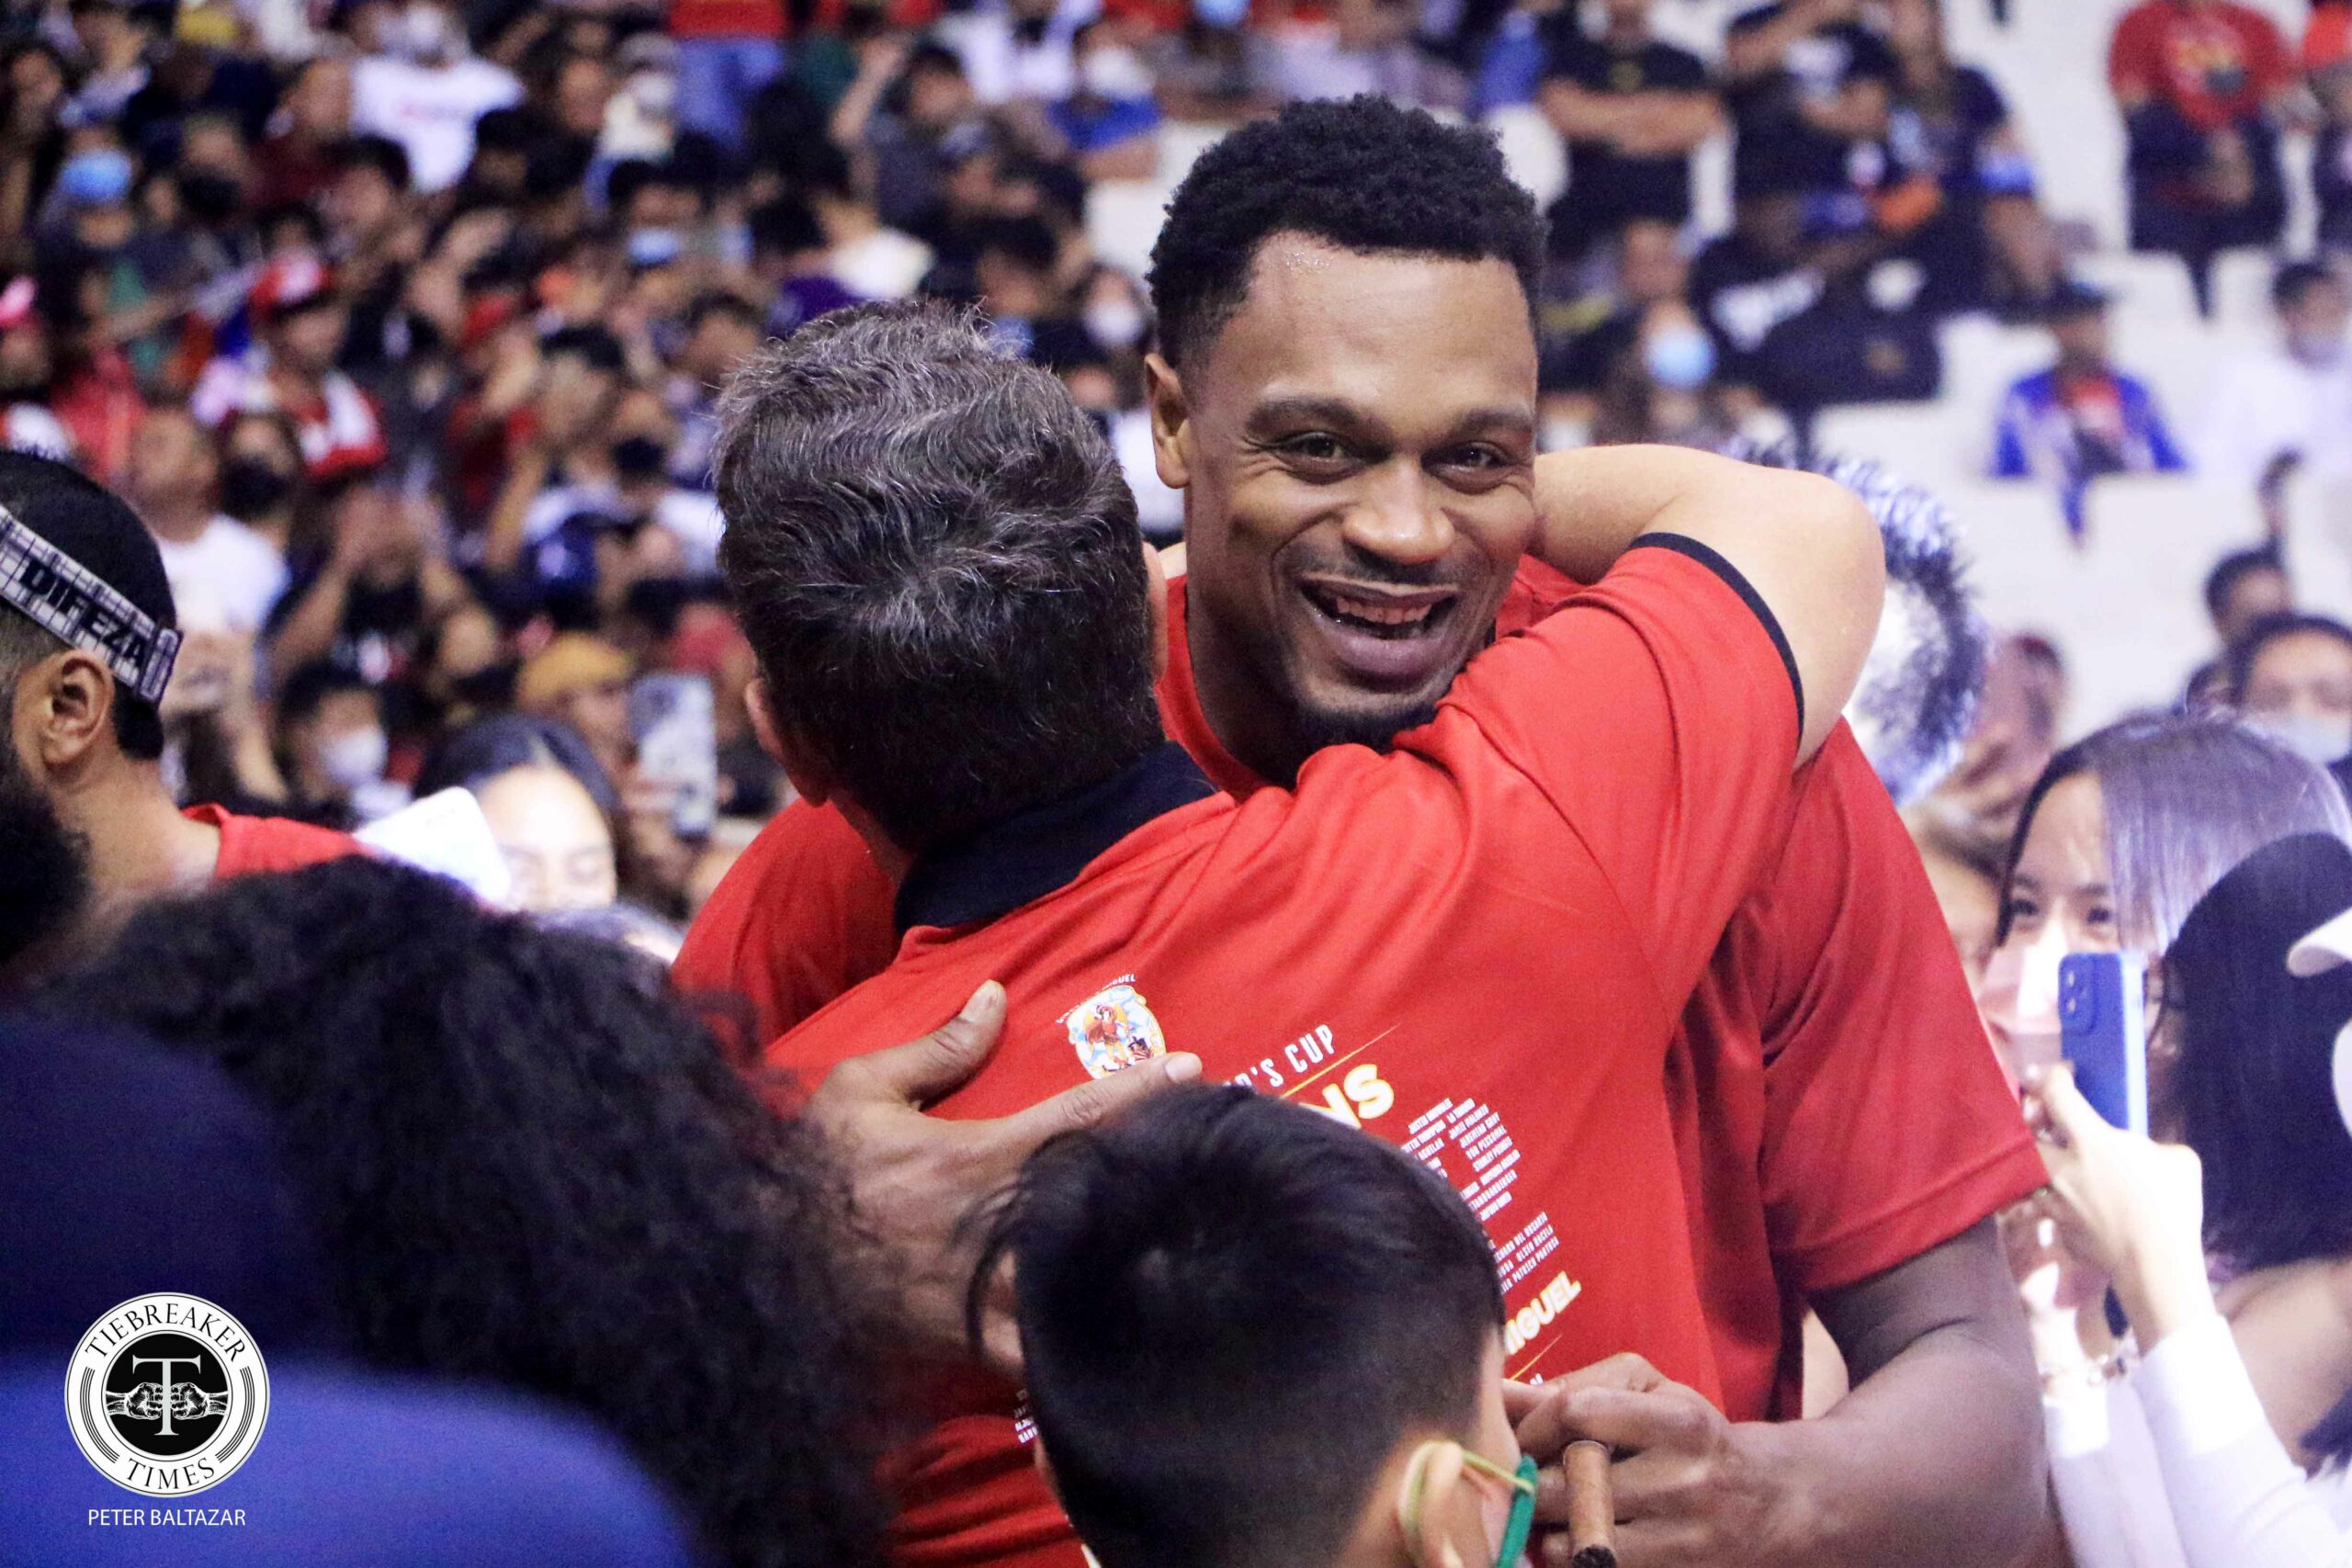 2022-PBA-Commissioners-Cup-Finals-Game-7-Ginebra-vs-Bay-Area-Justin-Brownlee-2-scaled Best yet to come for 34-year-old Brownlee, believes Cone 2023 FIBA World Cup Basketball Gilas Pilipinas News PBA  - philippine sports news